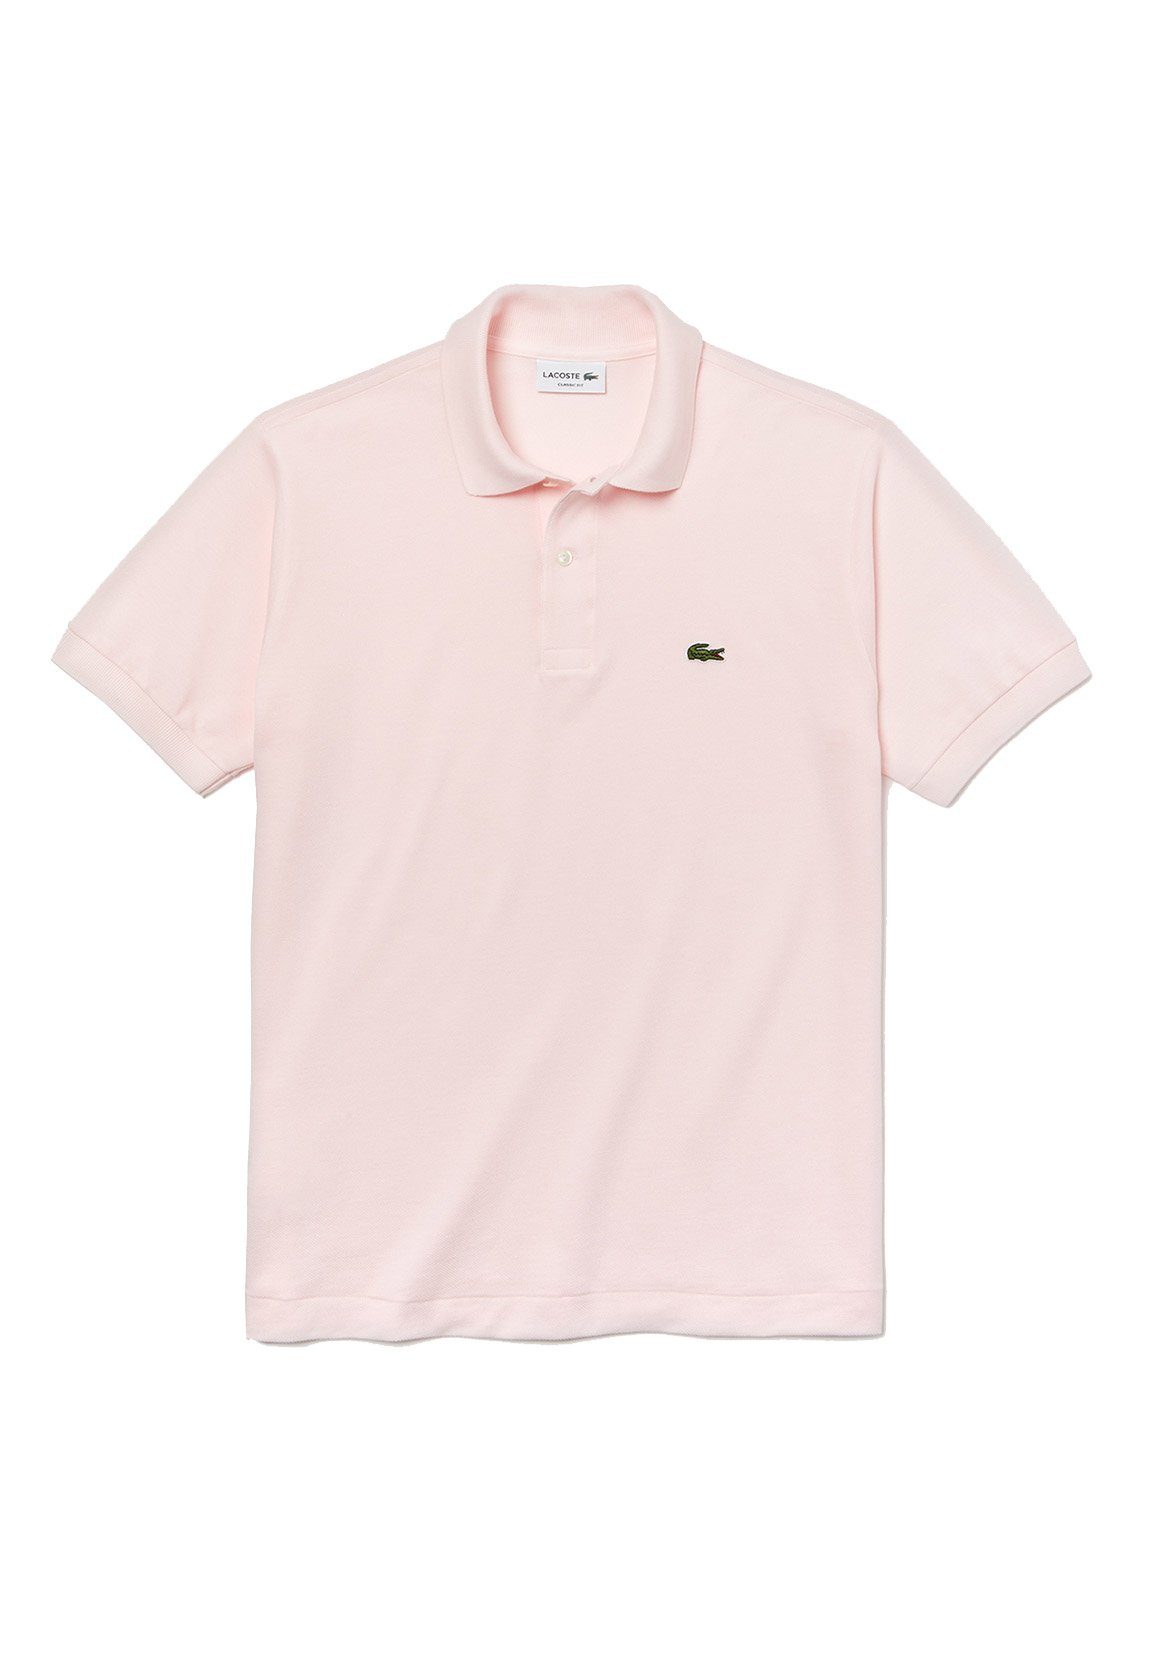 Lacoste Poloshirt Lacoste Polo SHORT SLEEVED RIBBED COLLAR SHIRT L1212 Rose Pale Rosa hellrosa | 